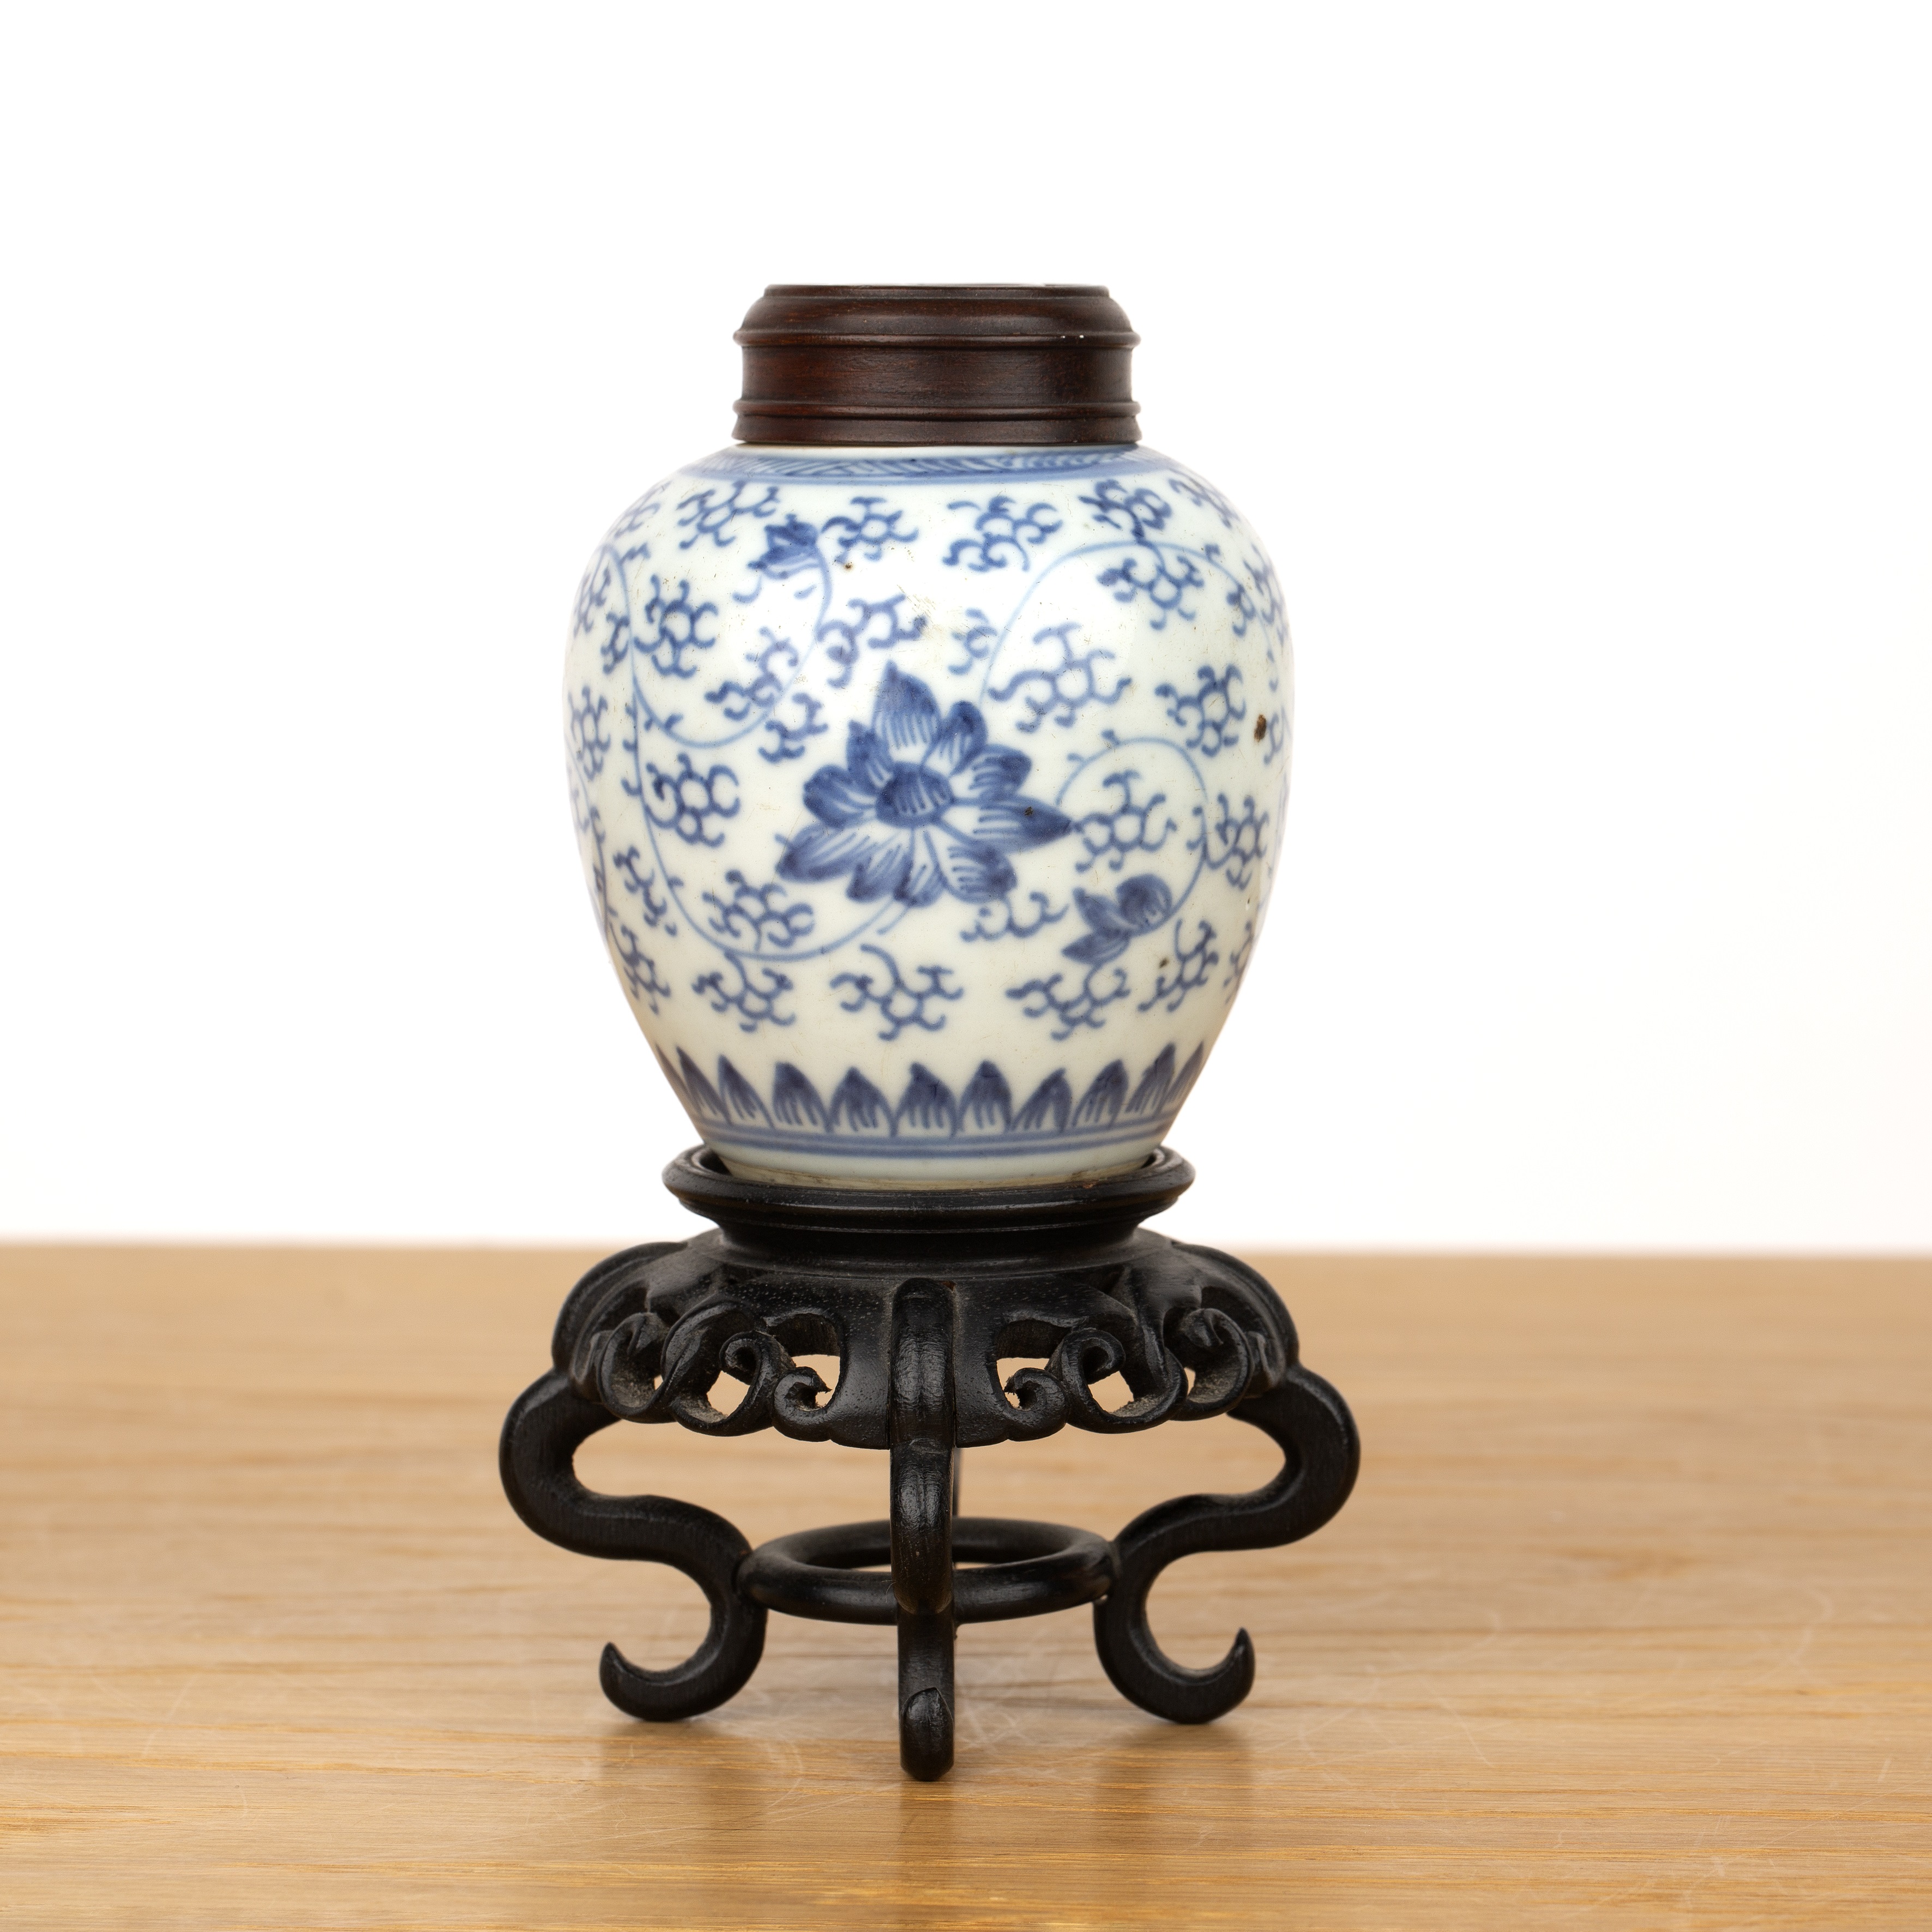 Small blue and white ginger jar with wood cover and stand Chinese, 18th/19th Century with Indian